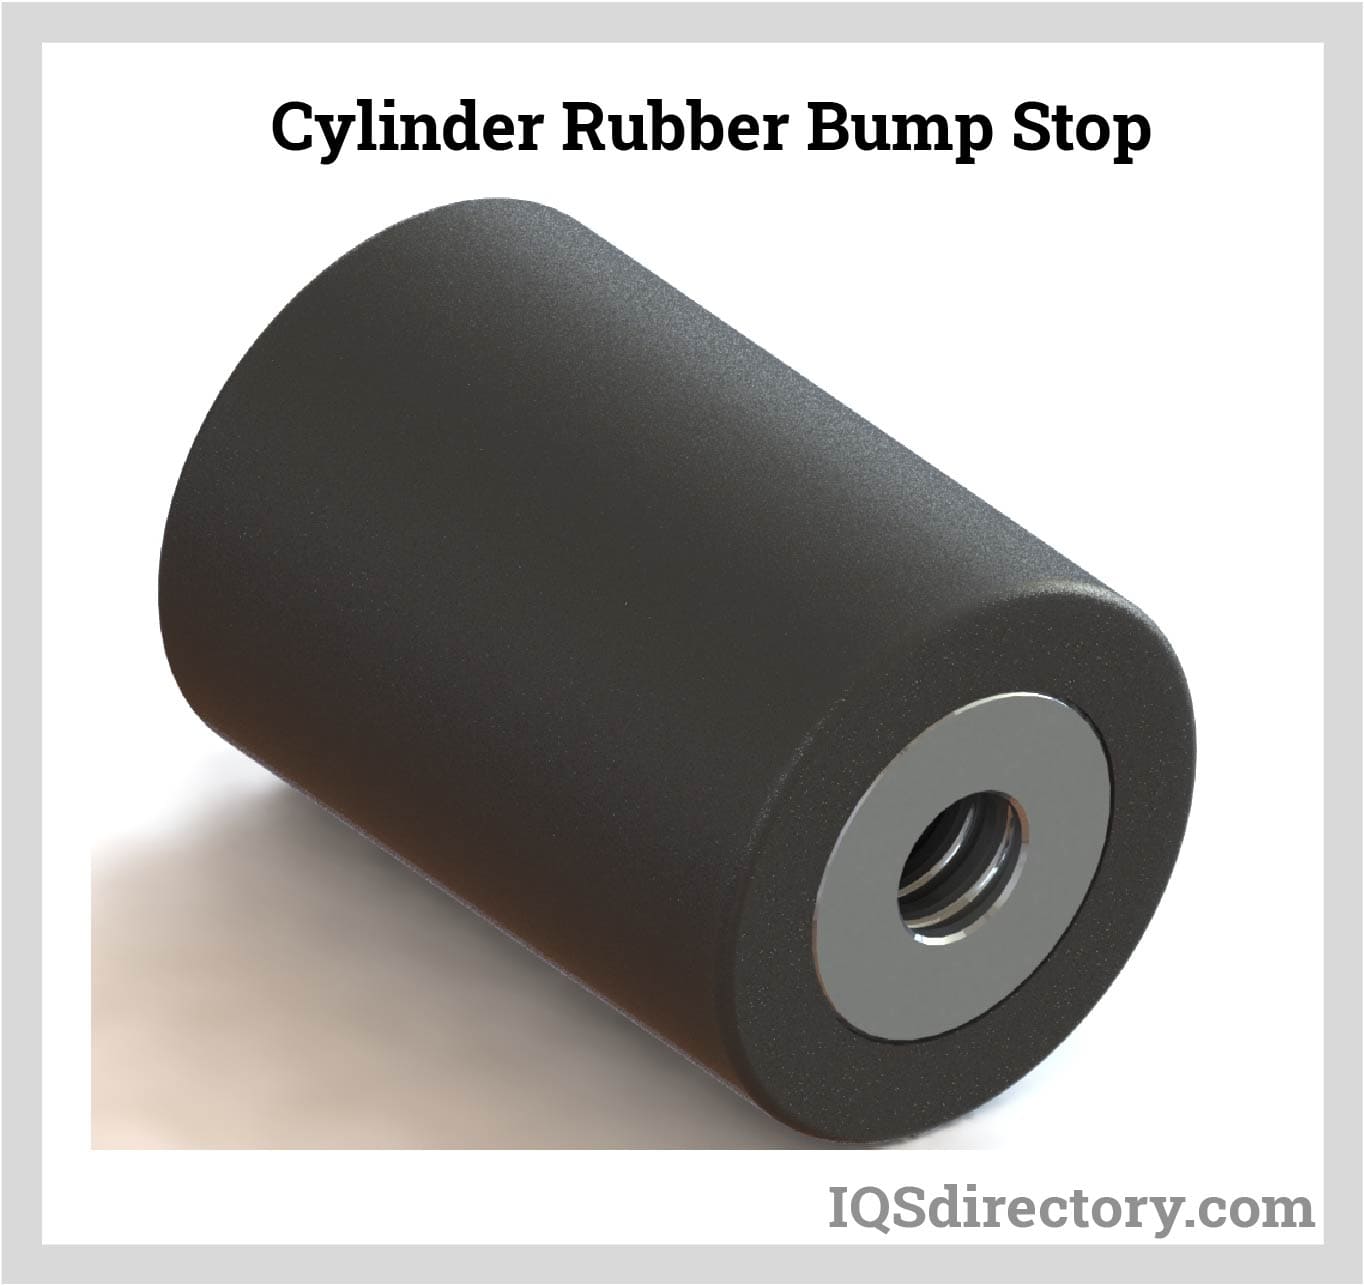 Cylinder Rubber Bump Stop